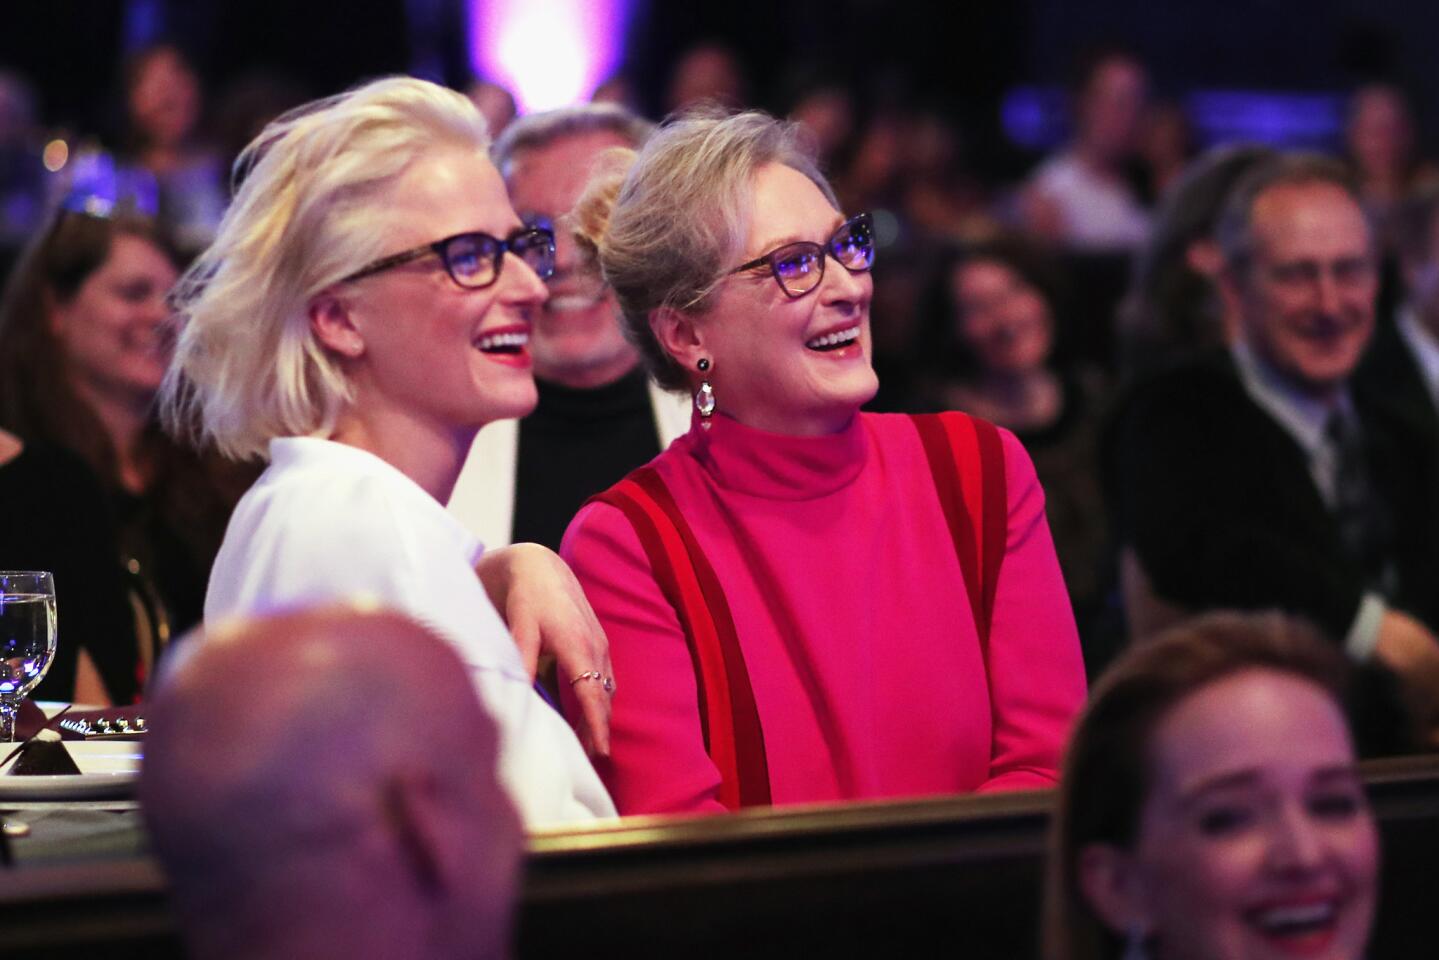 Mamie Gummer and her mother, honoree Meryl Streep, attend the 19th Costume Designers Guild Awards.